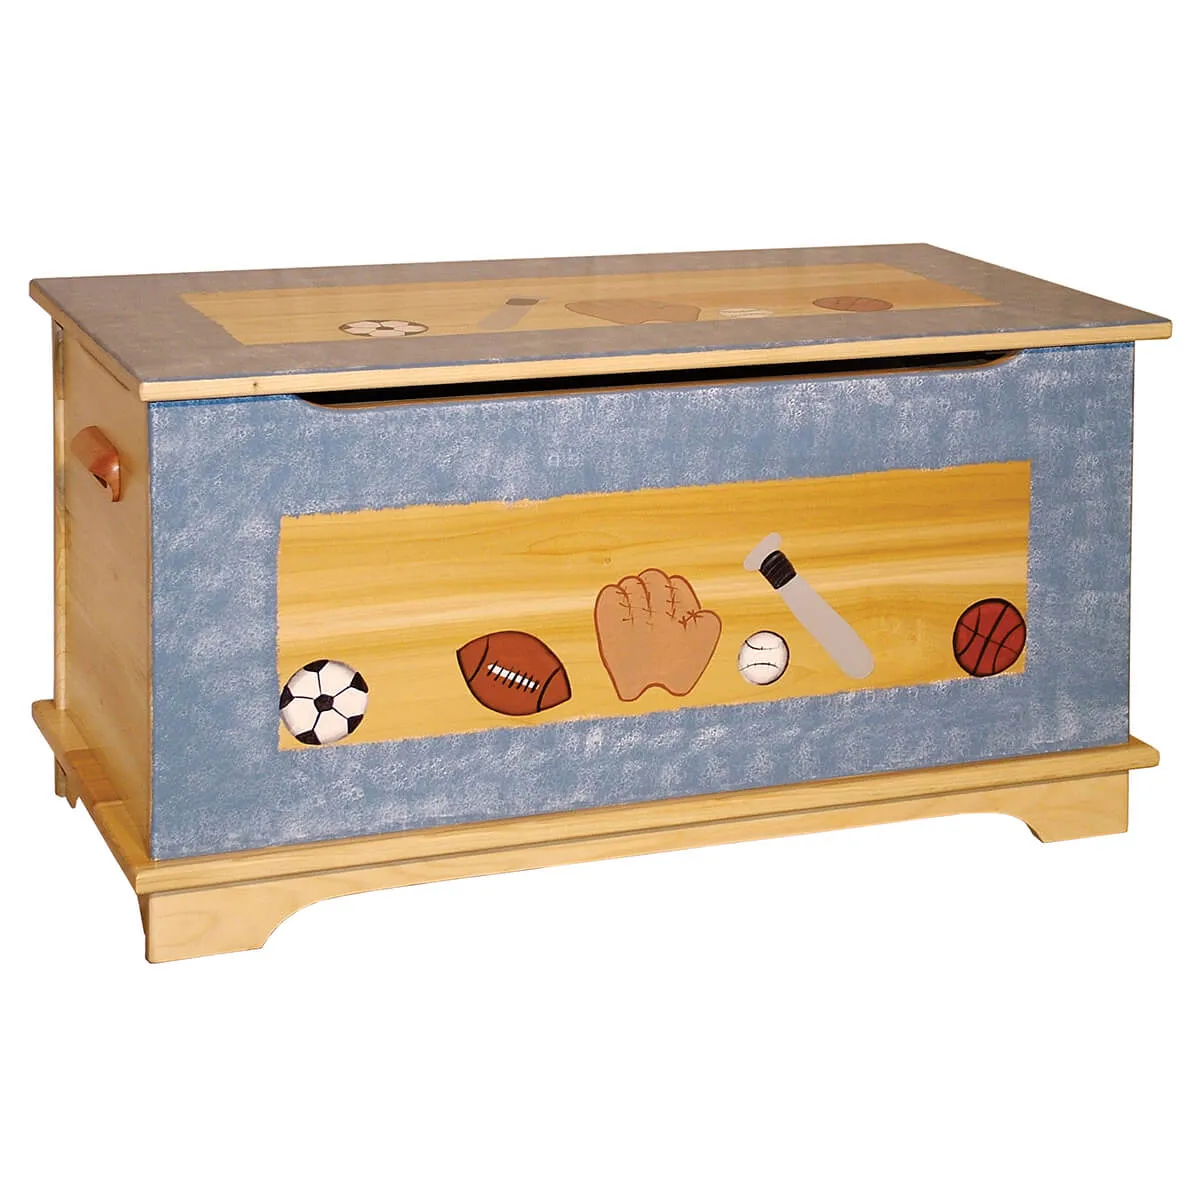 Shaker with Painted Design Toy Box